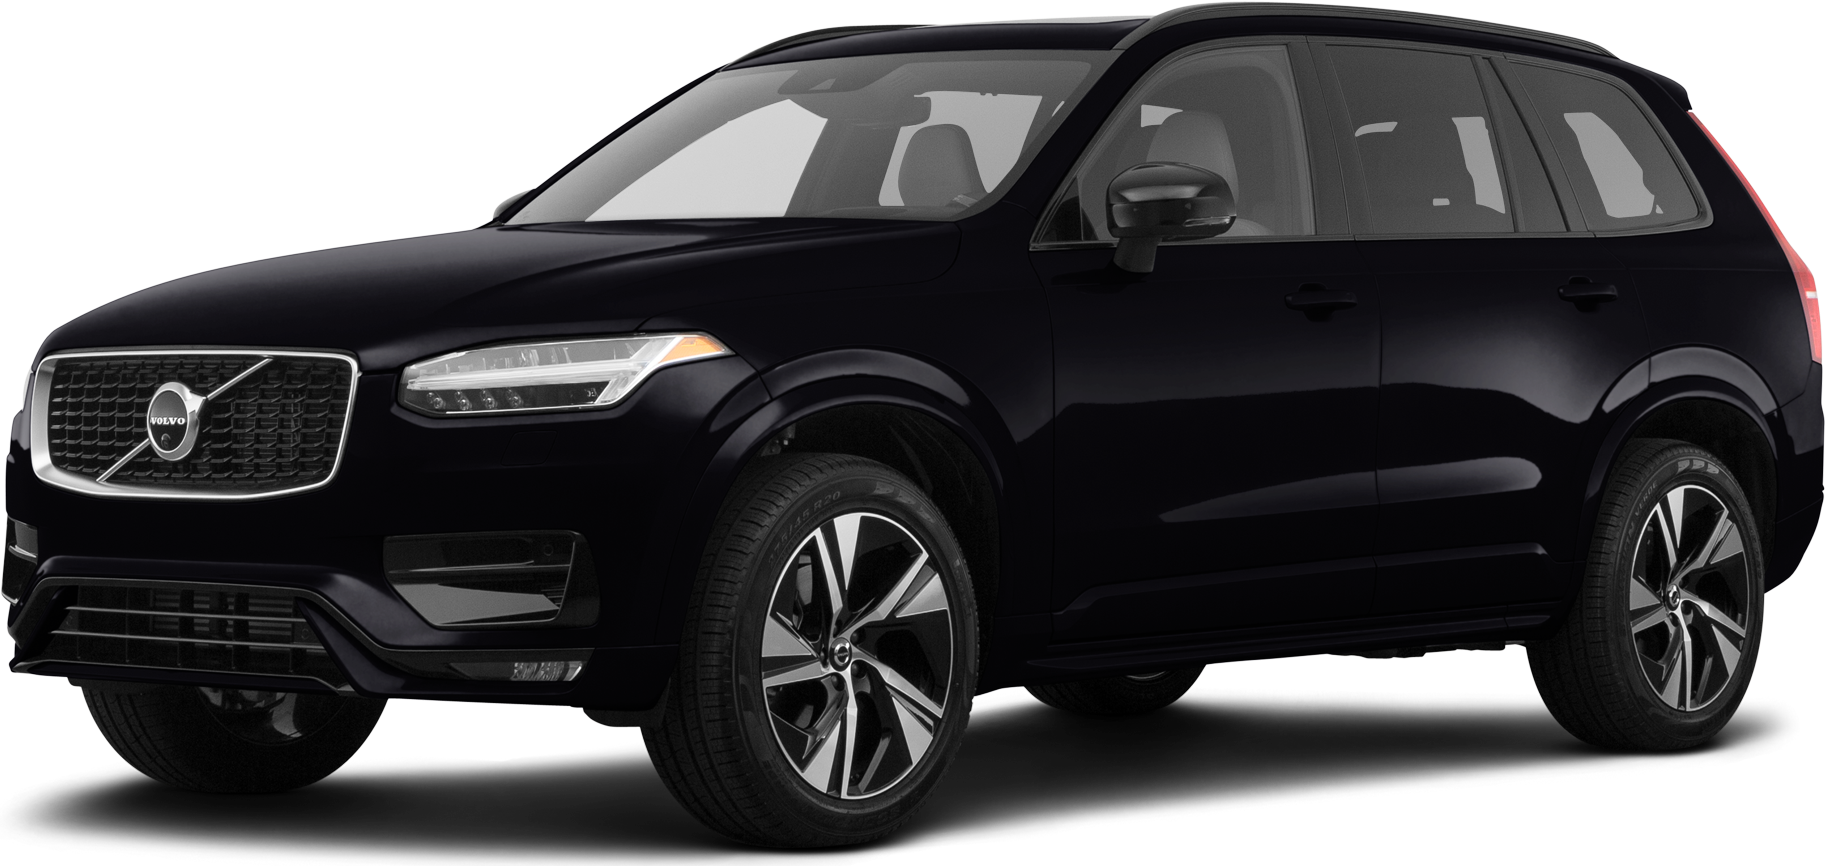 https://file.kelleybluebookimages.com/kbb/base/evox/CP/13893/2021-Volvo-XC90-front_13893_032_1825x866_717_cropped.png